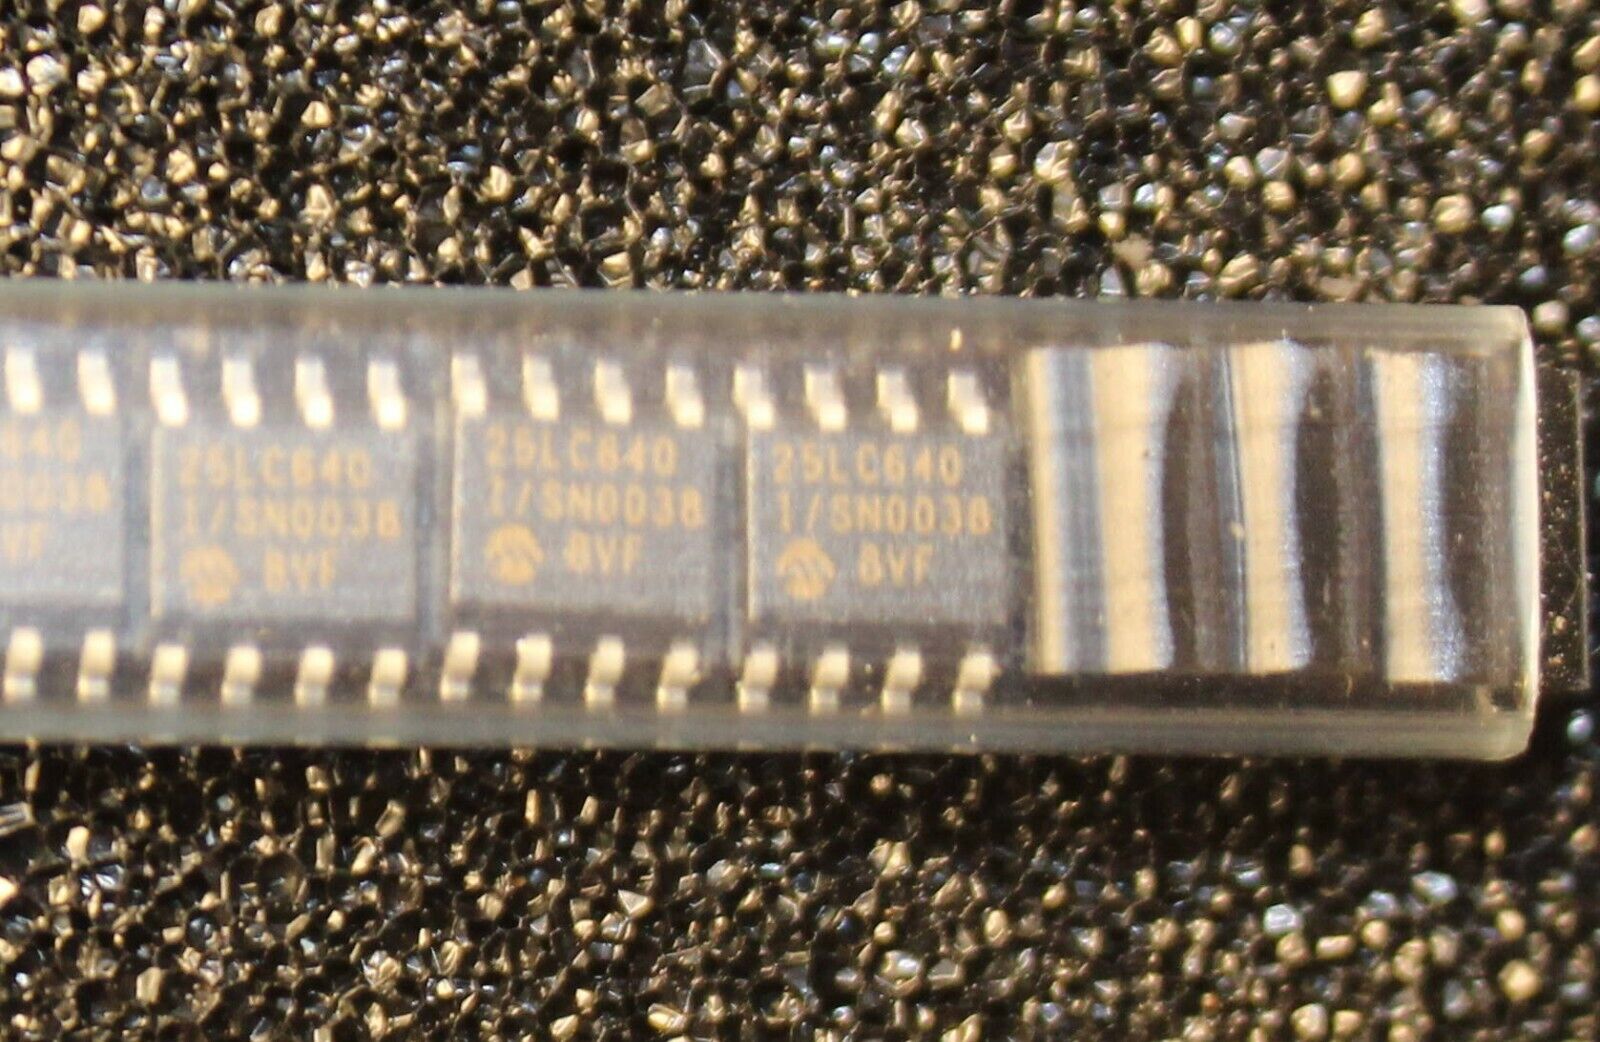 Microchip 25LC640-I/SN EEPROM Memory IC 64Kb (8K x 8) SPI 2 MHz 8-SOIC